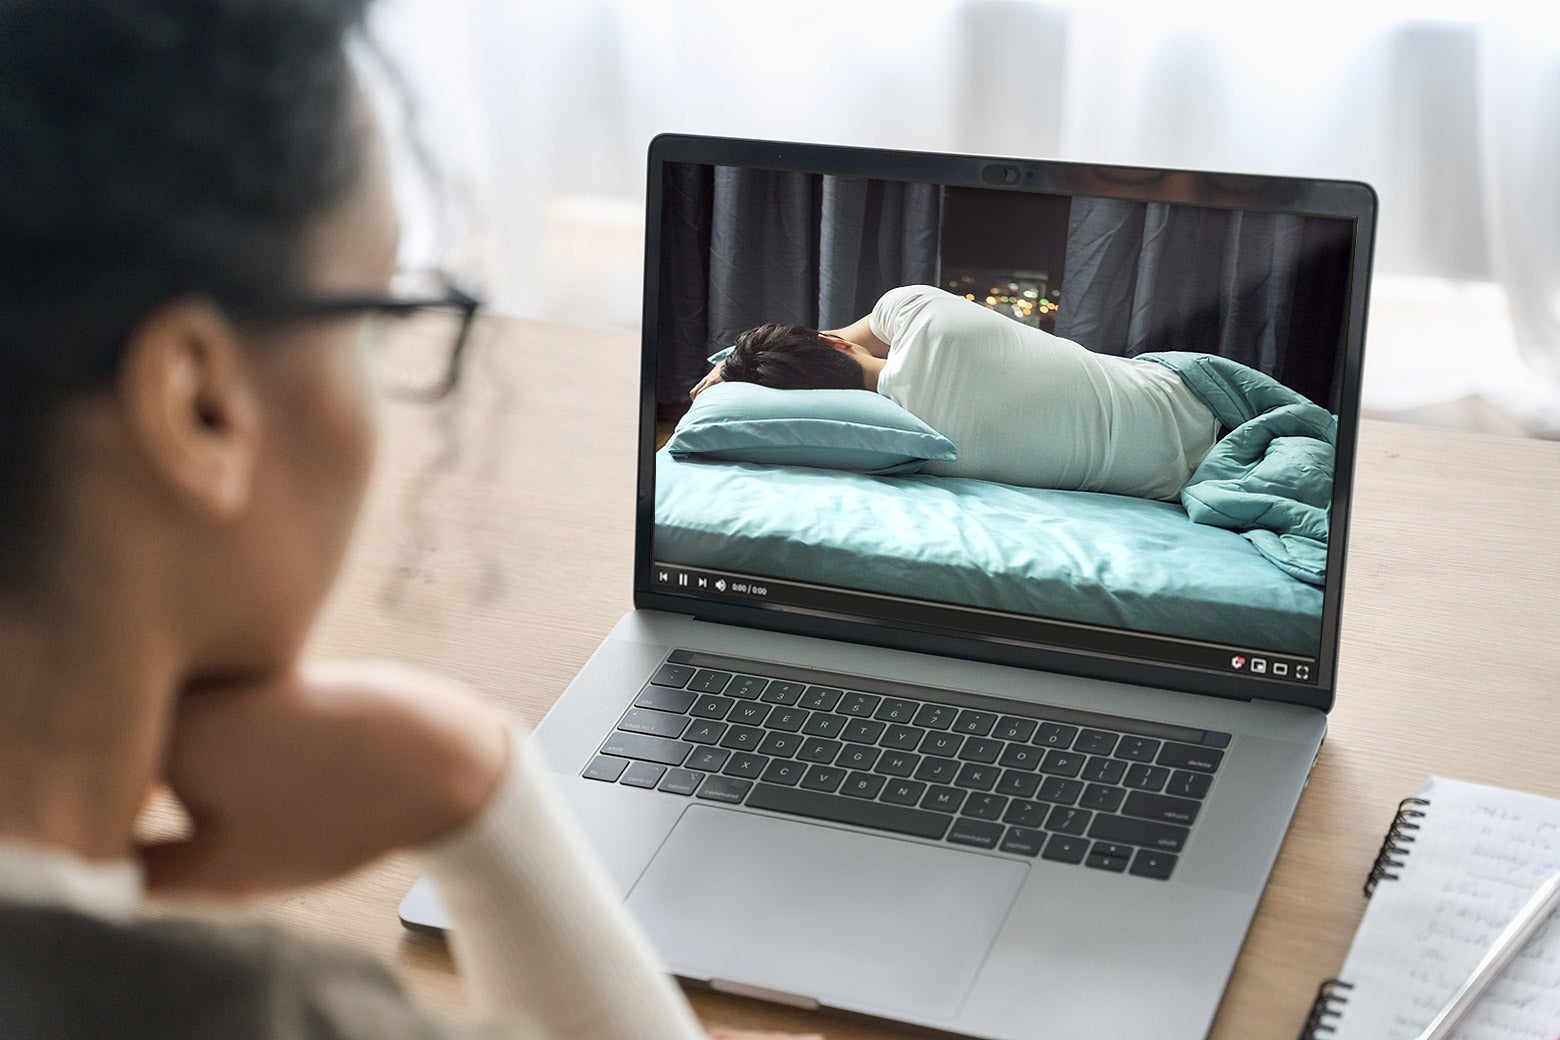 A person watches a man sleeping on a laptop.